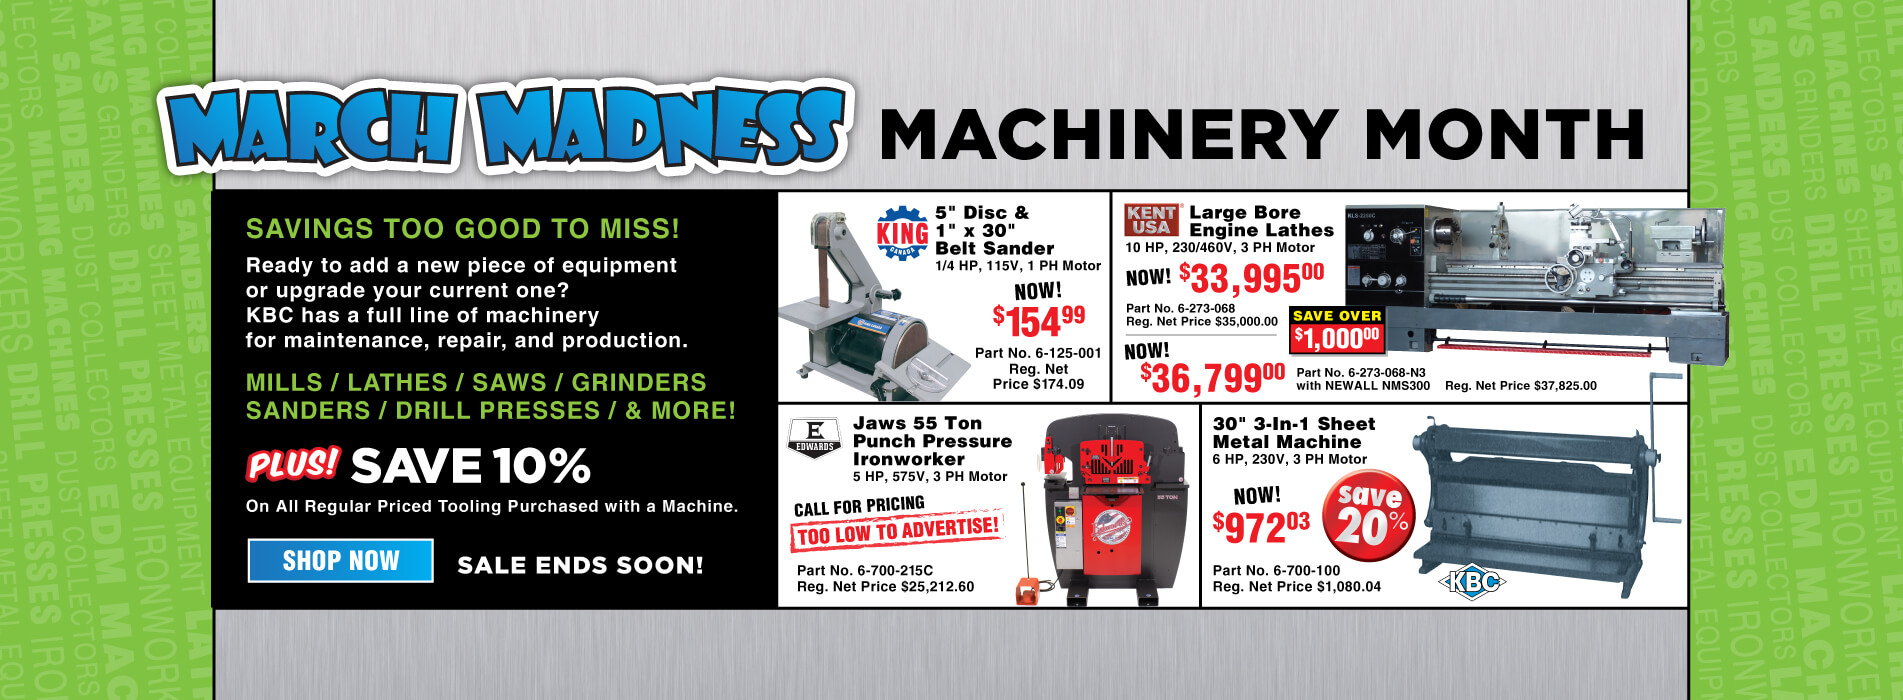 Machinery Madness: Unbeatable Deals on In-Stock Machines! Only this month: Grab your must-have machines at madness sale prices!